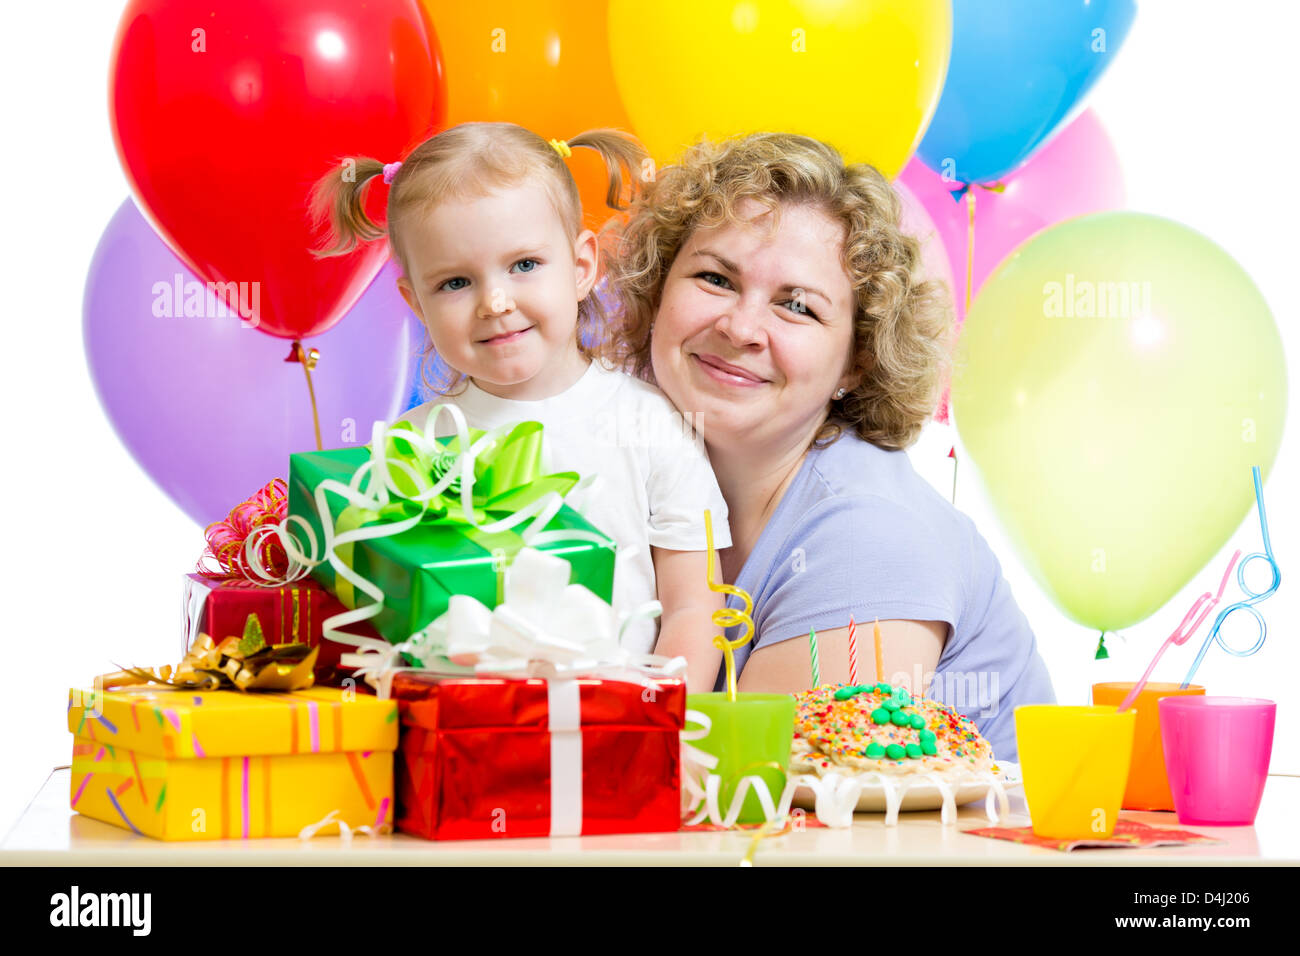 little girl and mother celebrate birthday holiday Stock Photo